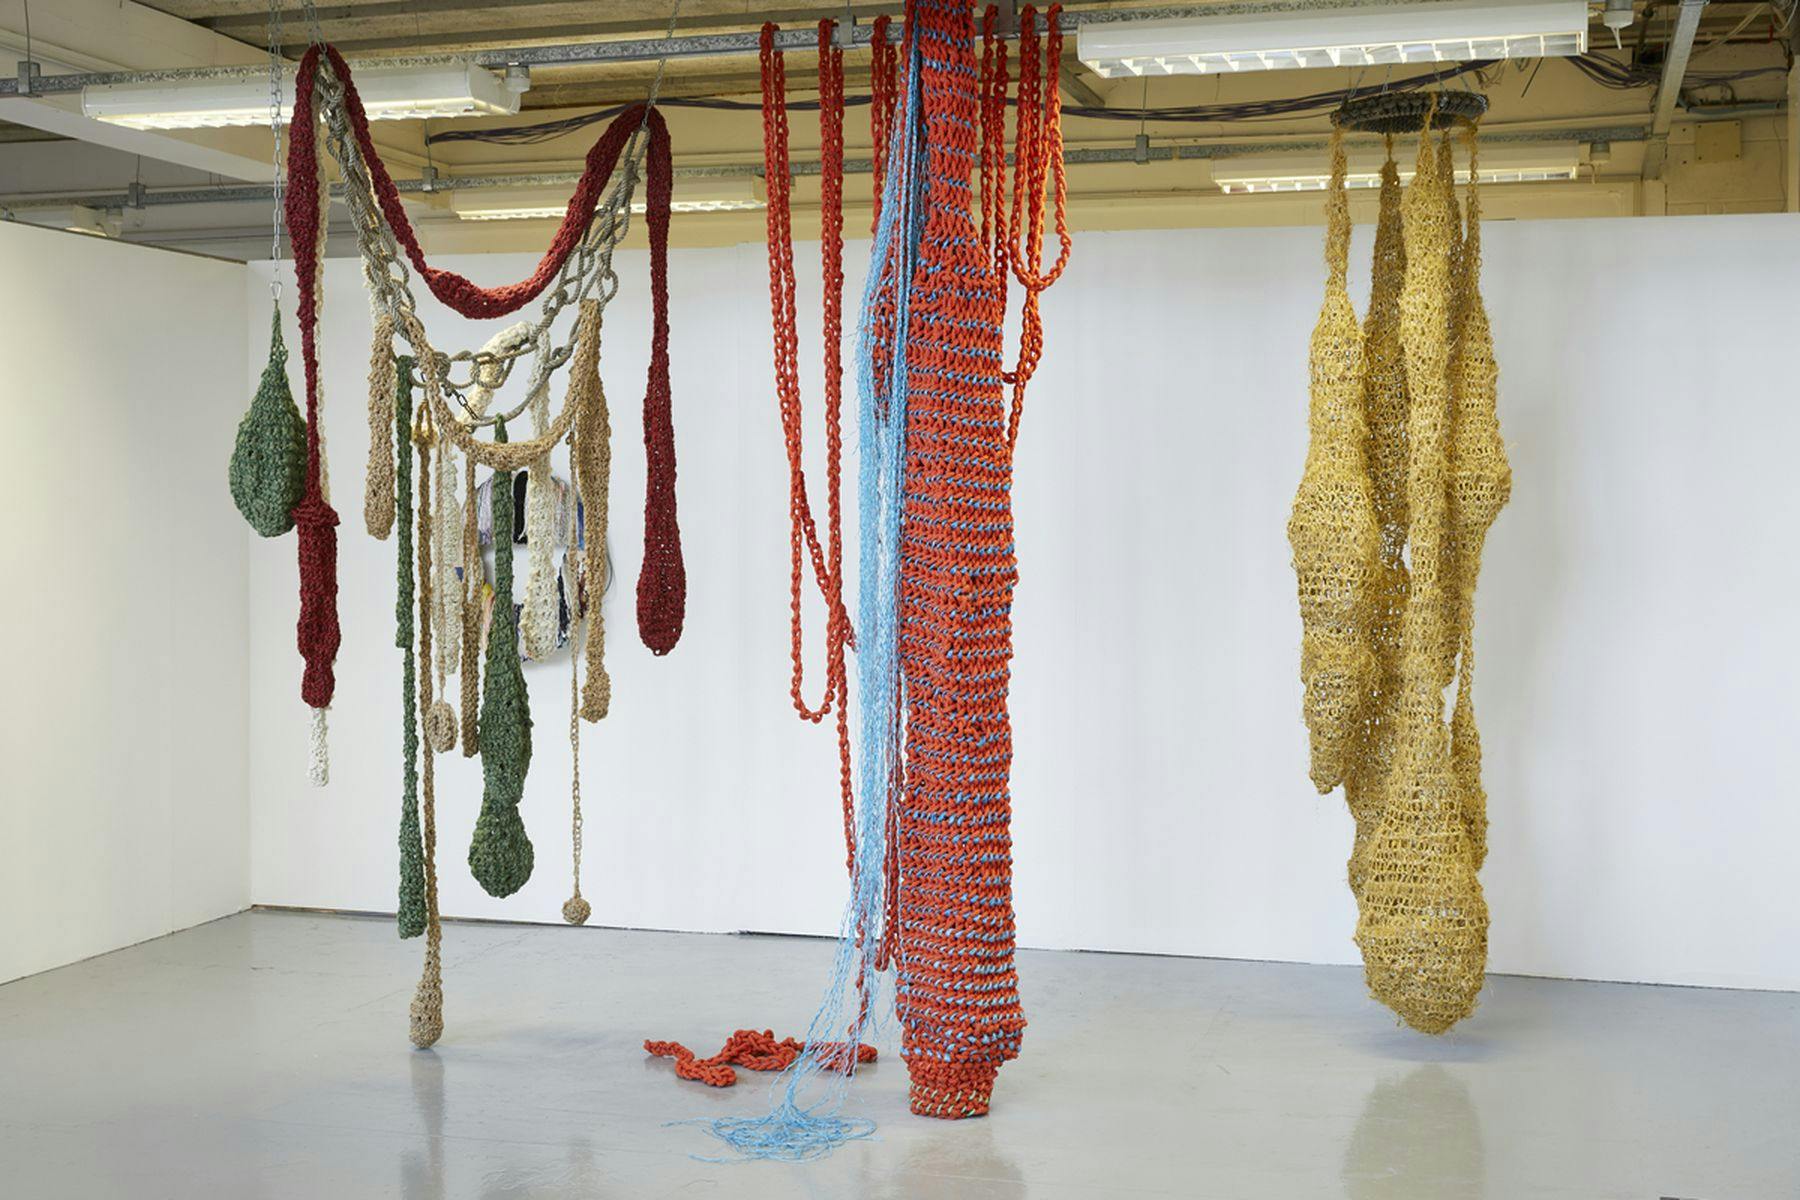 A photograph of three knitted structures hanging from the ceiling. The knitting comprises of greens, oranges, blues, yellows and creams. The structures have varying shapes.